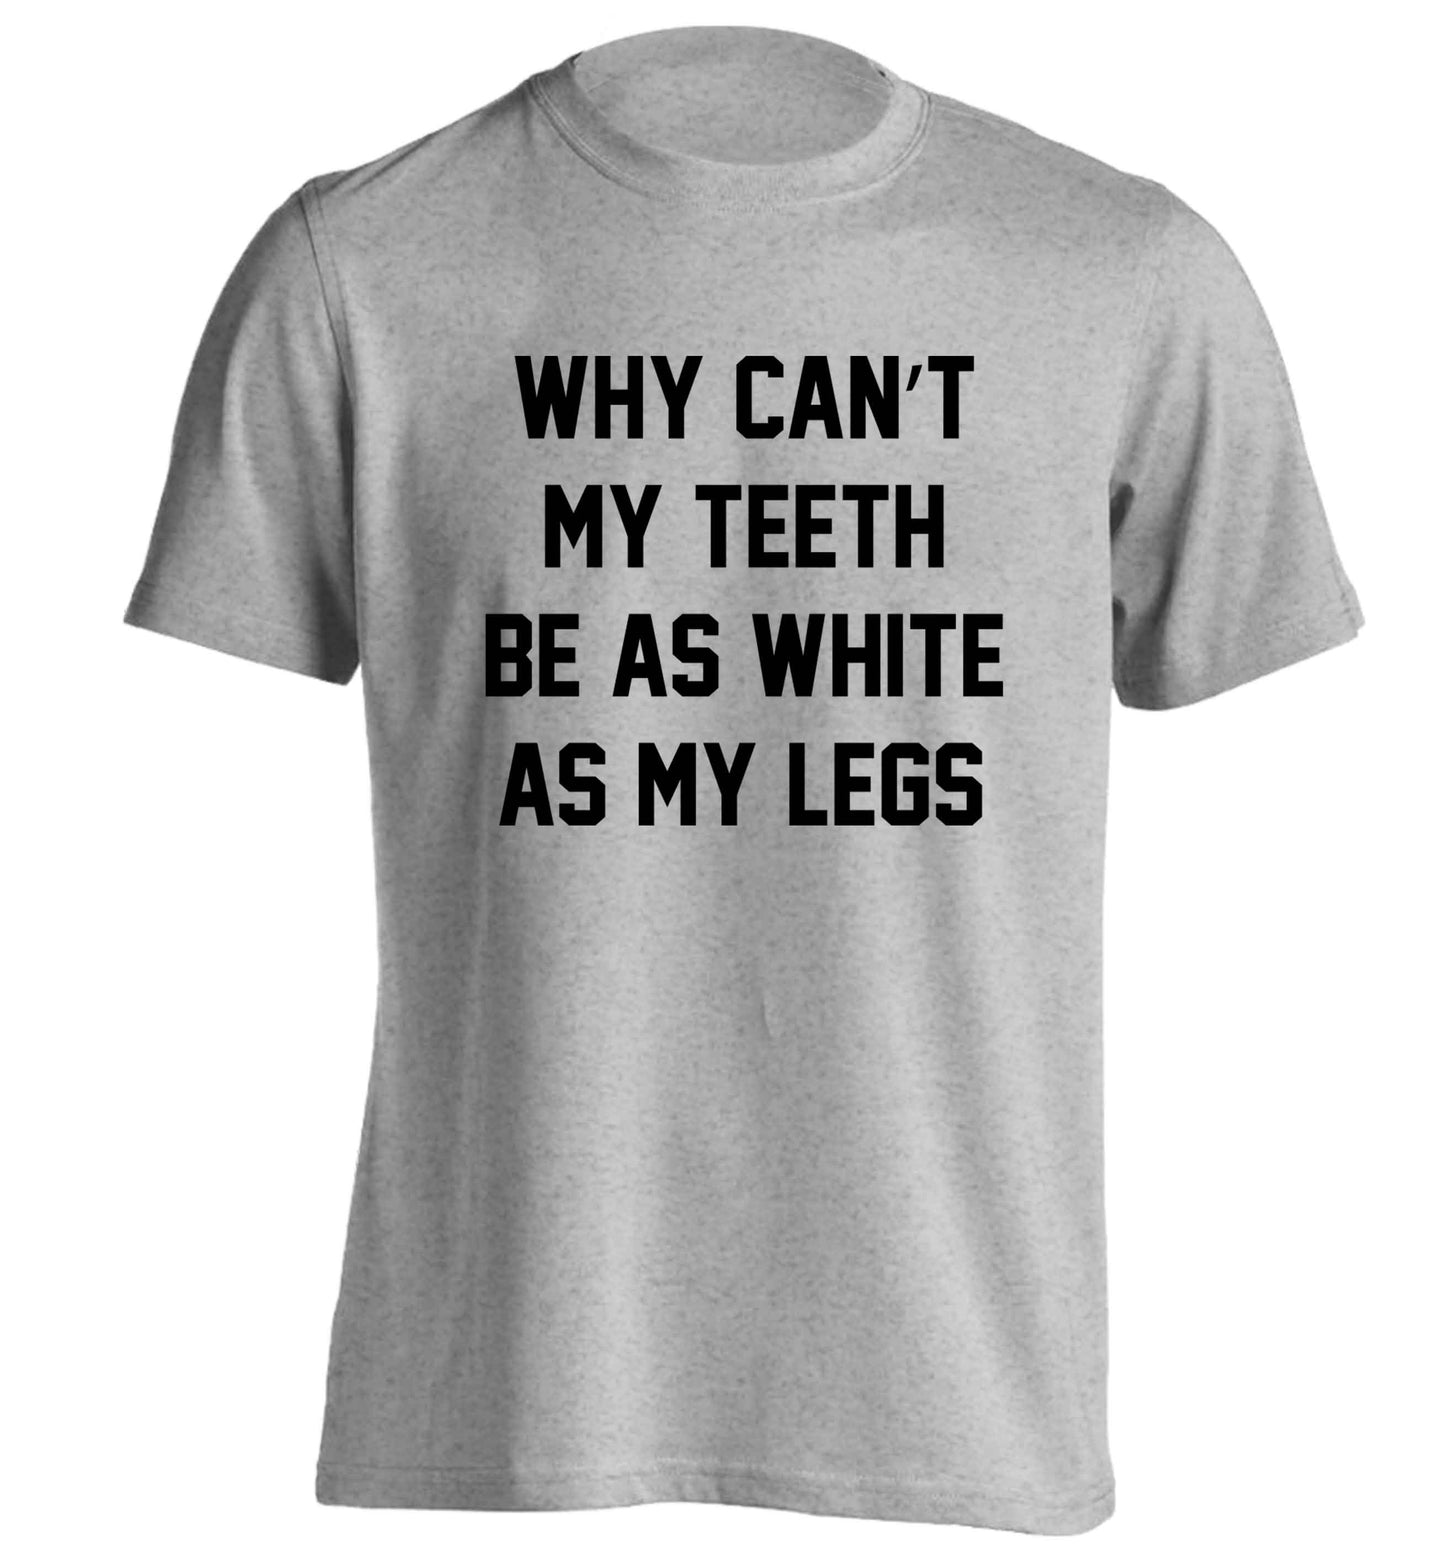 Why can't my teeth be as white as my legs adults unisex grey Tshirt 2XL